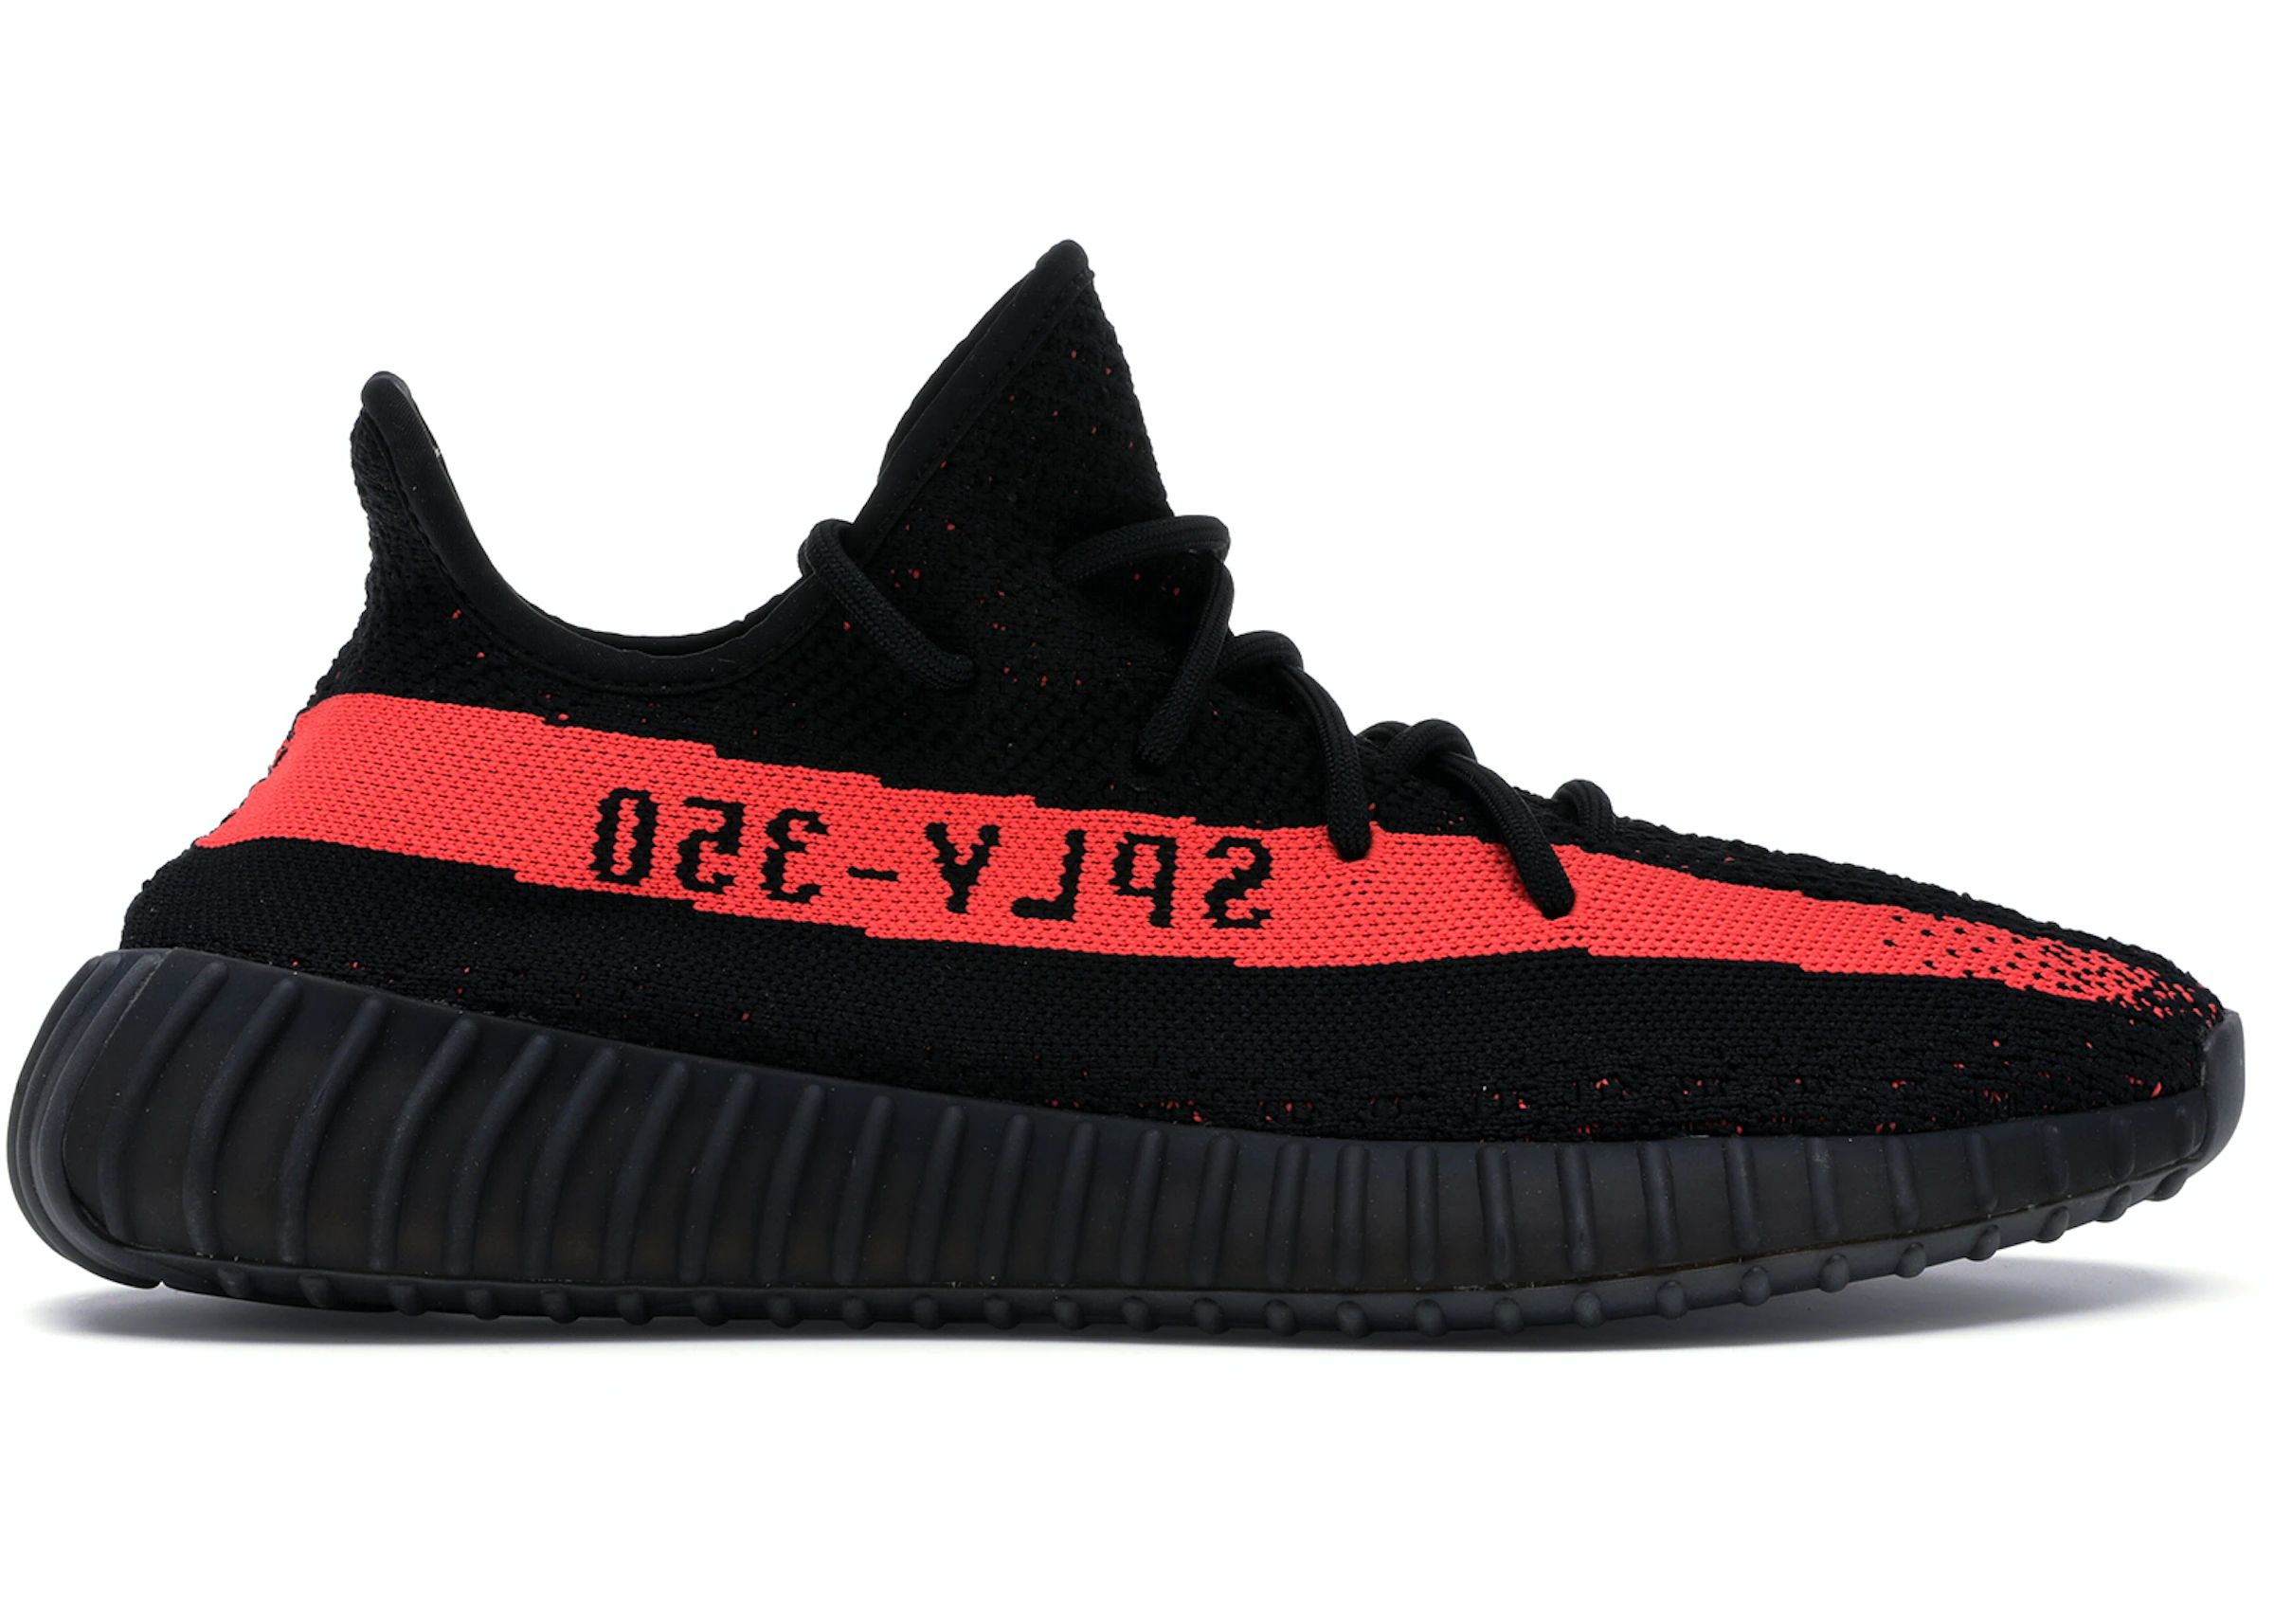 Care sort judge adidas Yeezy Boost 350 V2 Core Black Red (2016/2022) - BY9612 - US